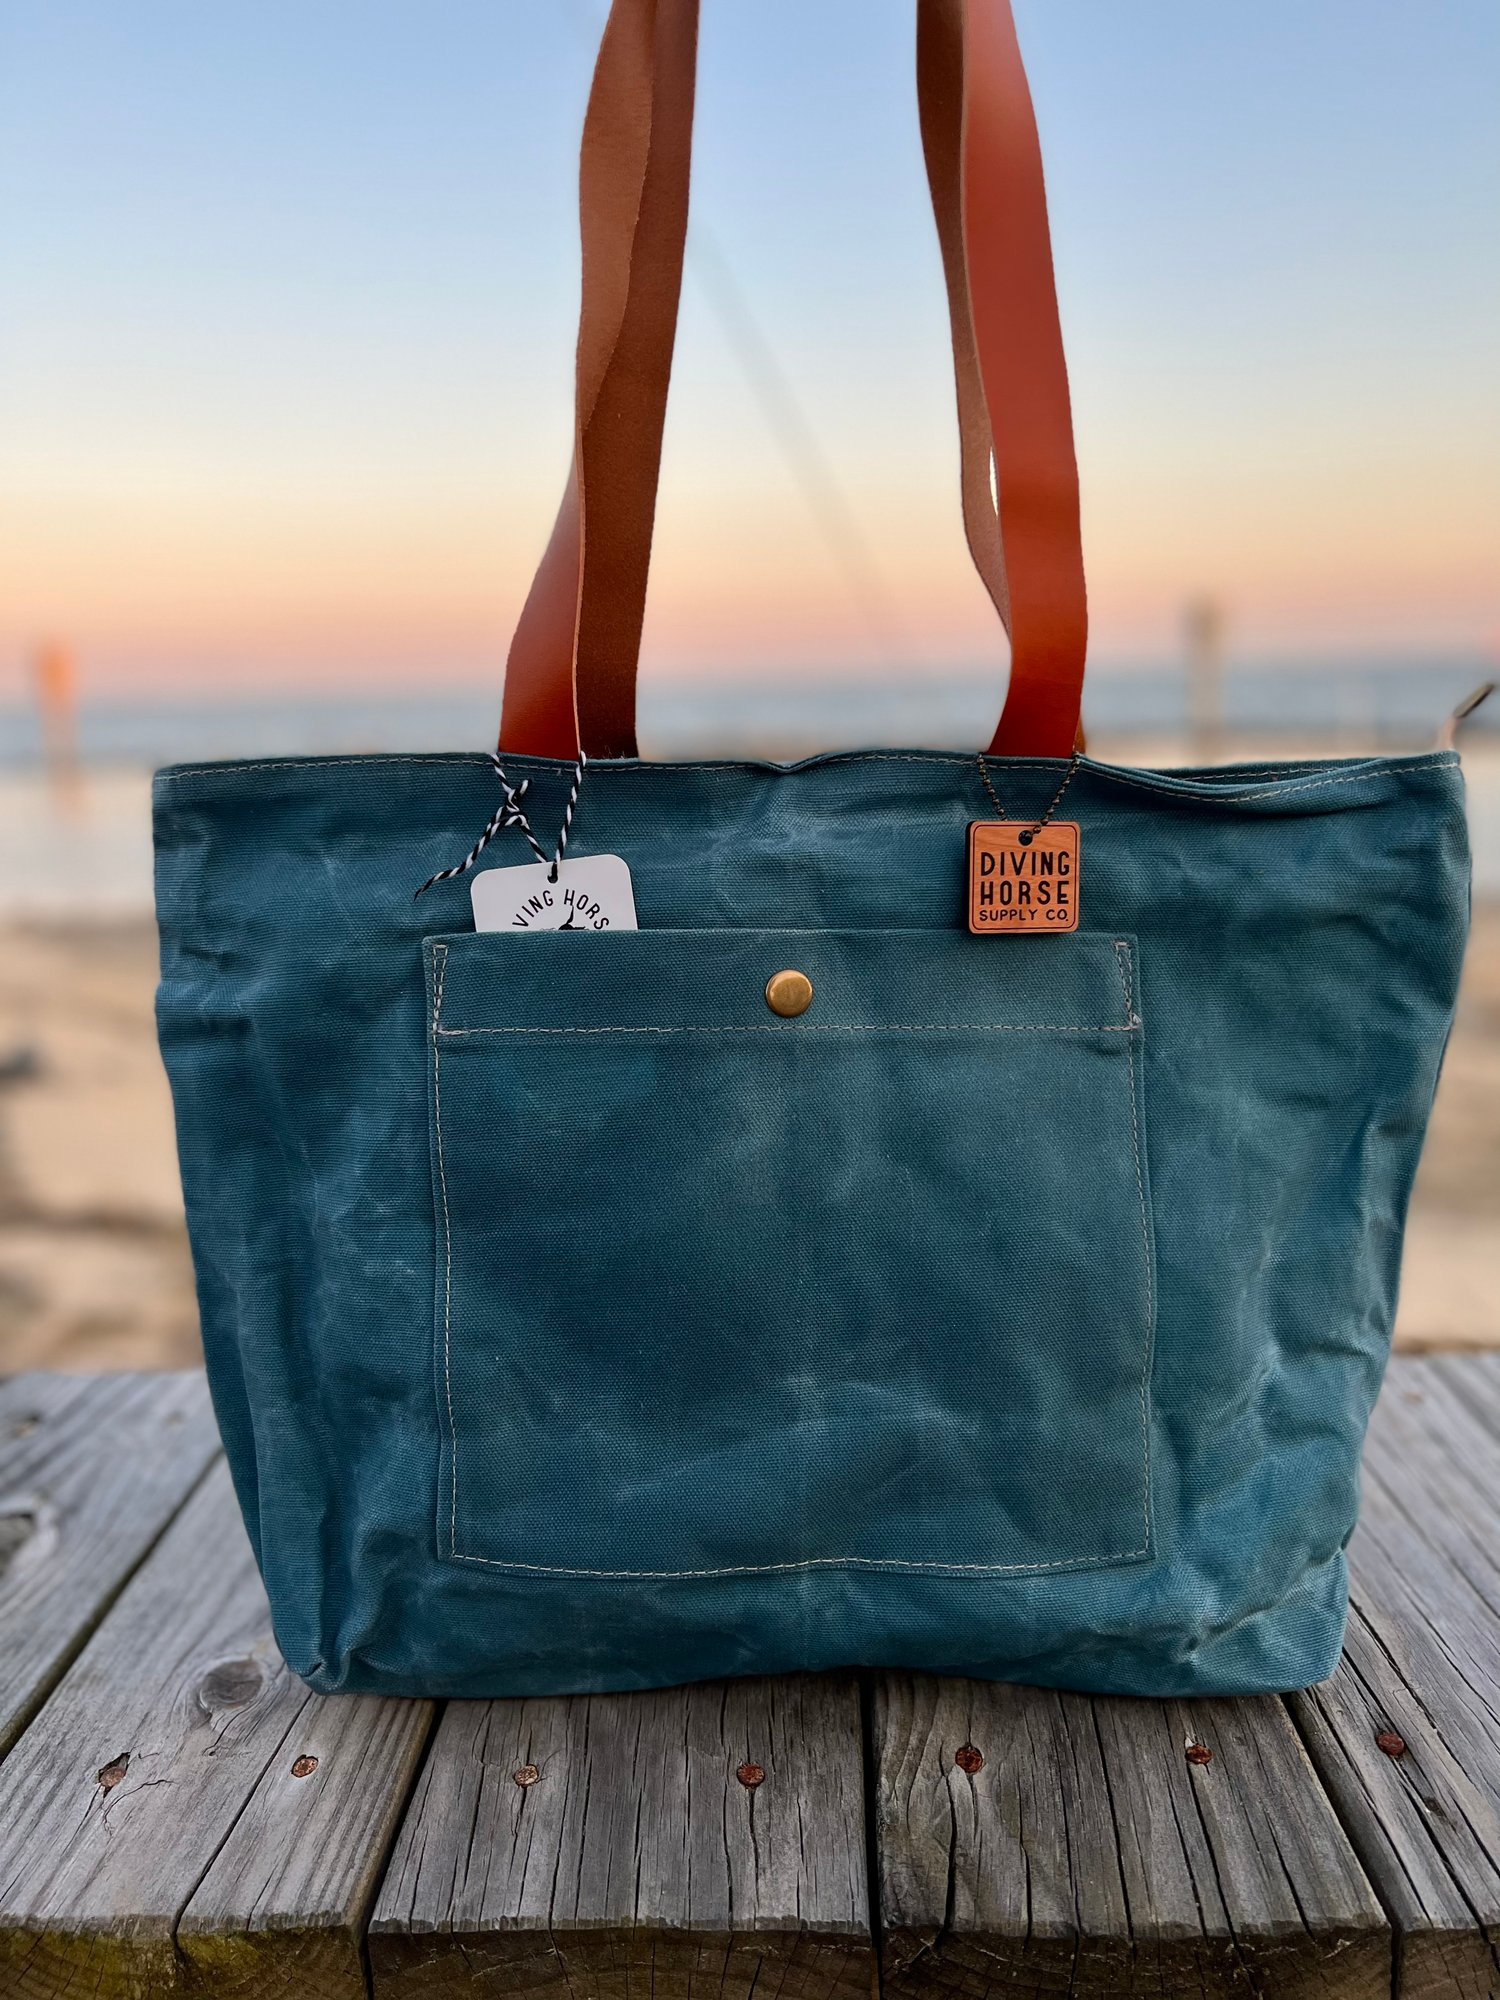 Waxed canvas and leather tote with zipper | Diving Horse Supply Co.